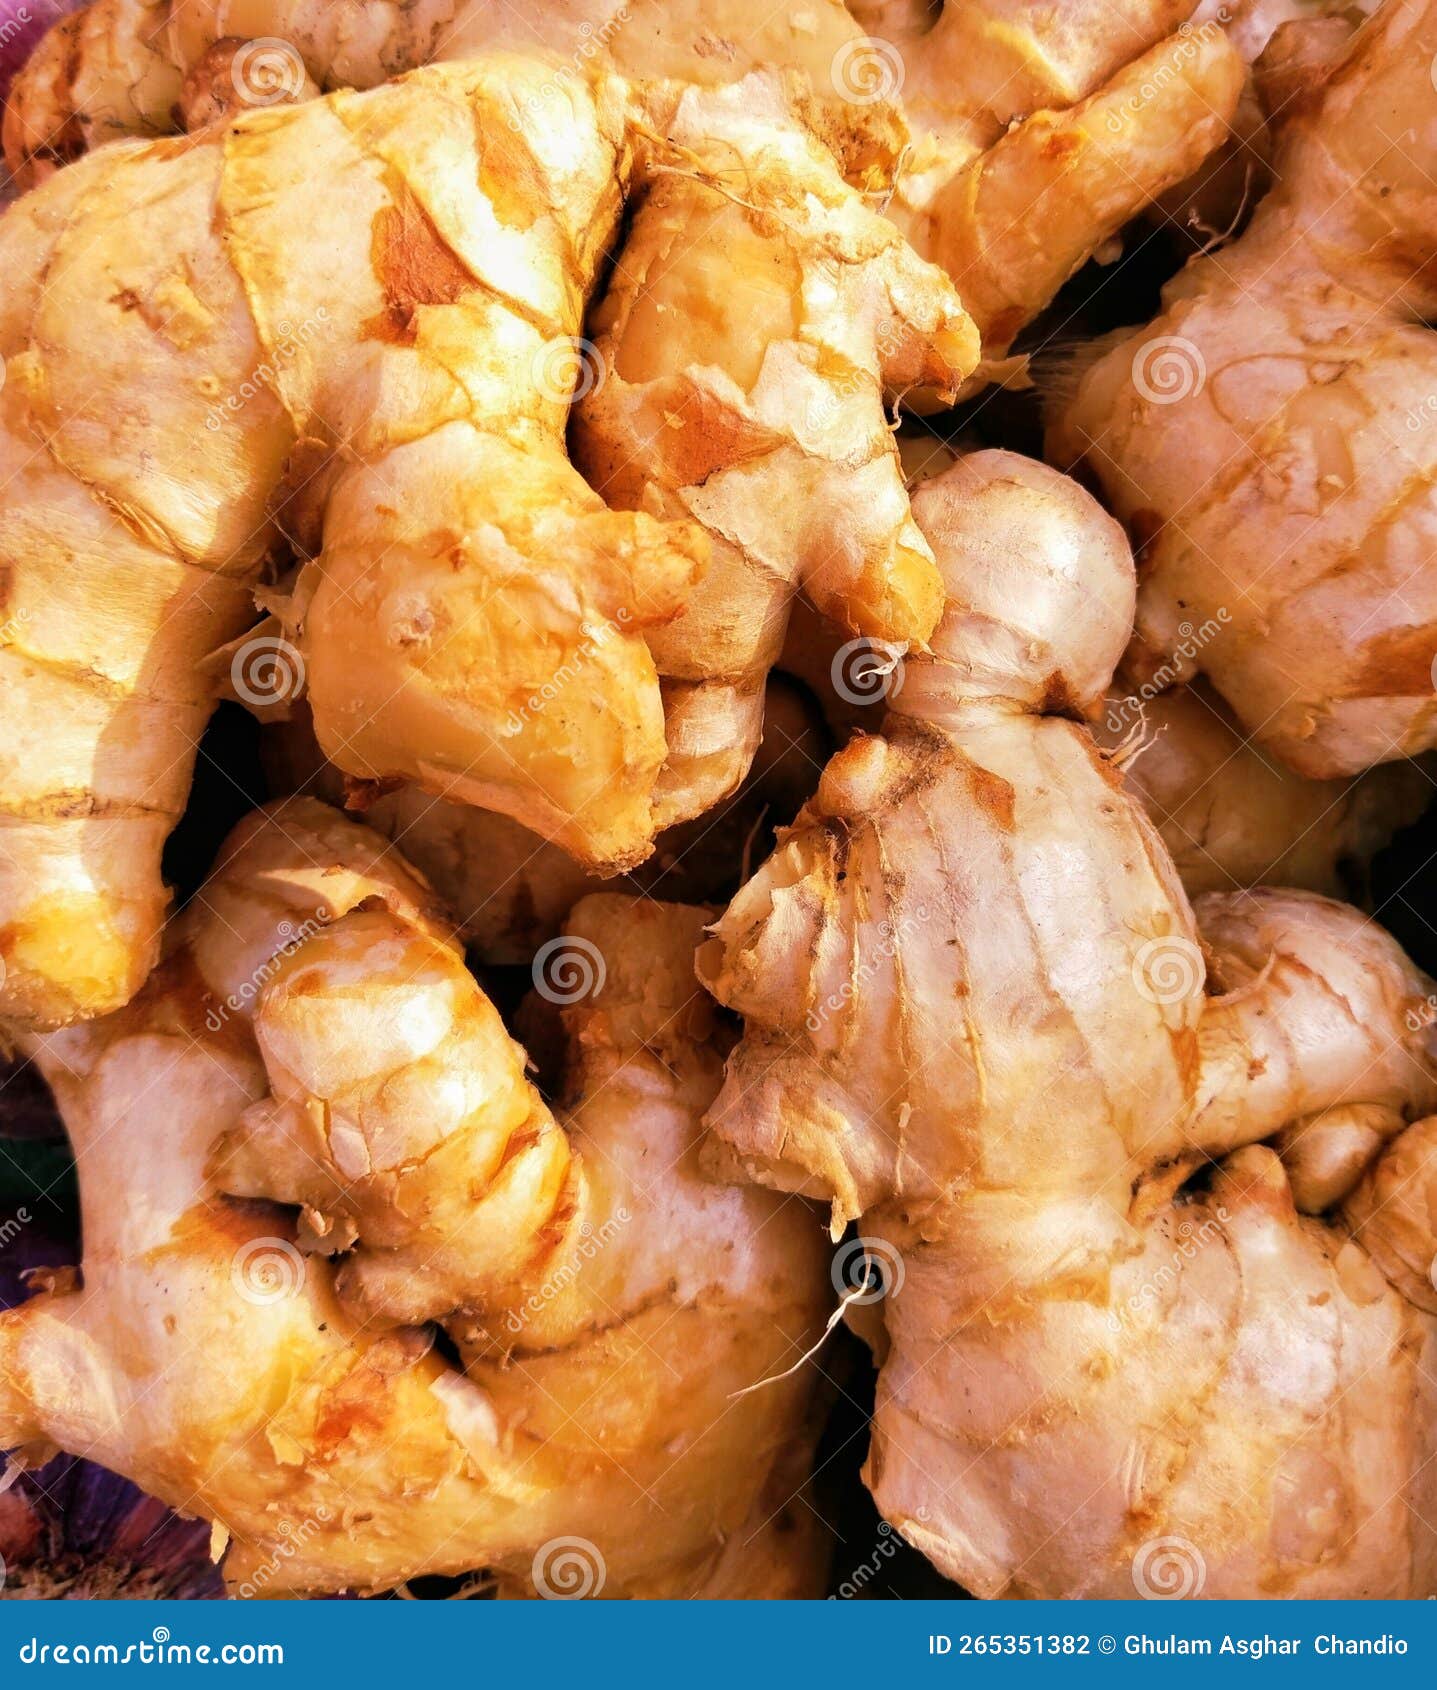 ginger root spice a pungent aromatic rhizome of a tropical asian herb indian adarak chinese culinary and folk medicine photo